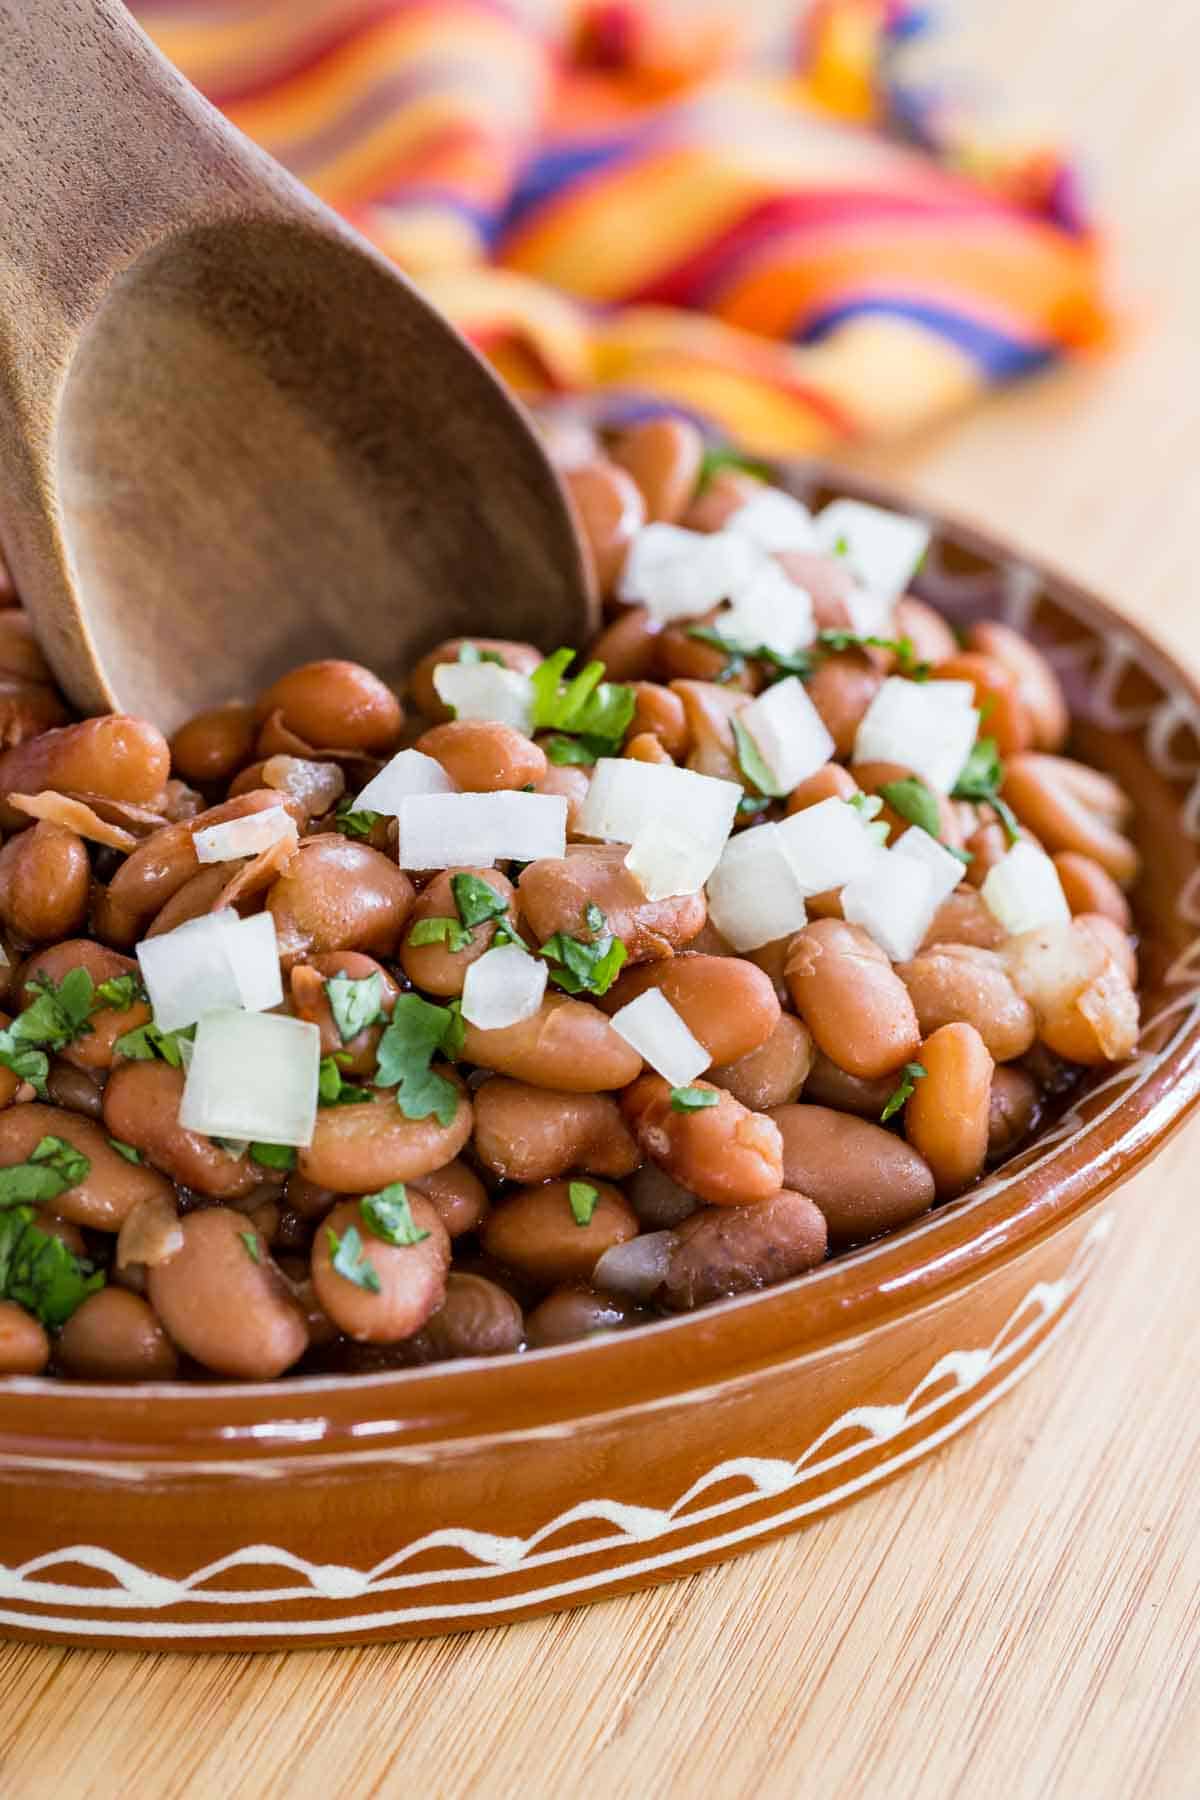 A wooden spoon dips into a bowl of Instant Pot pinto beans garnished with diced onions and cilantro.